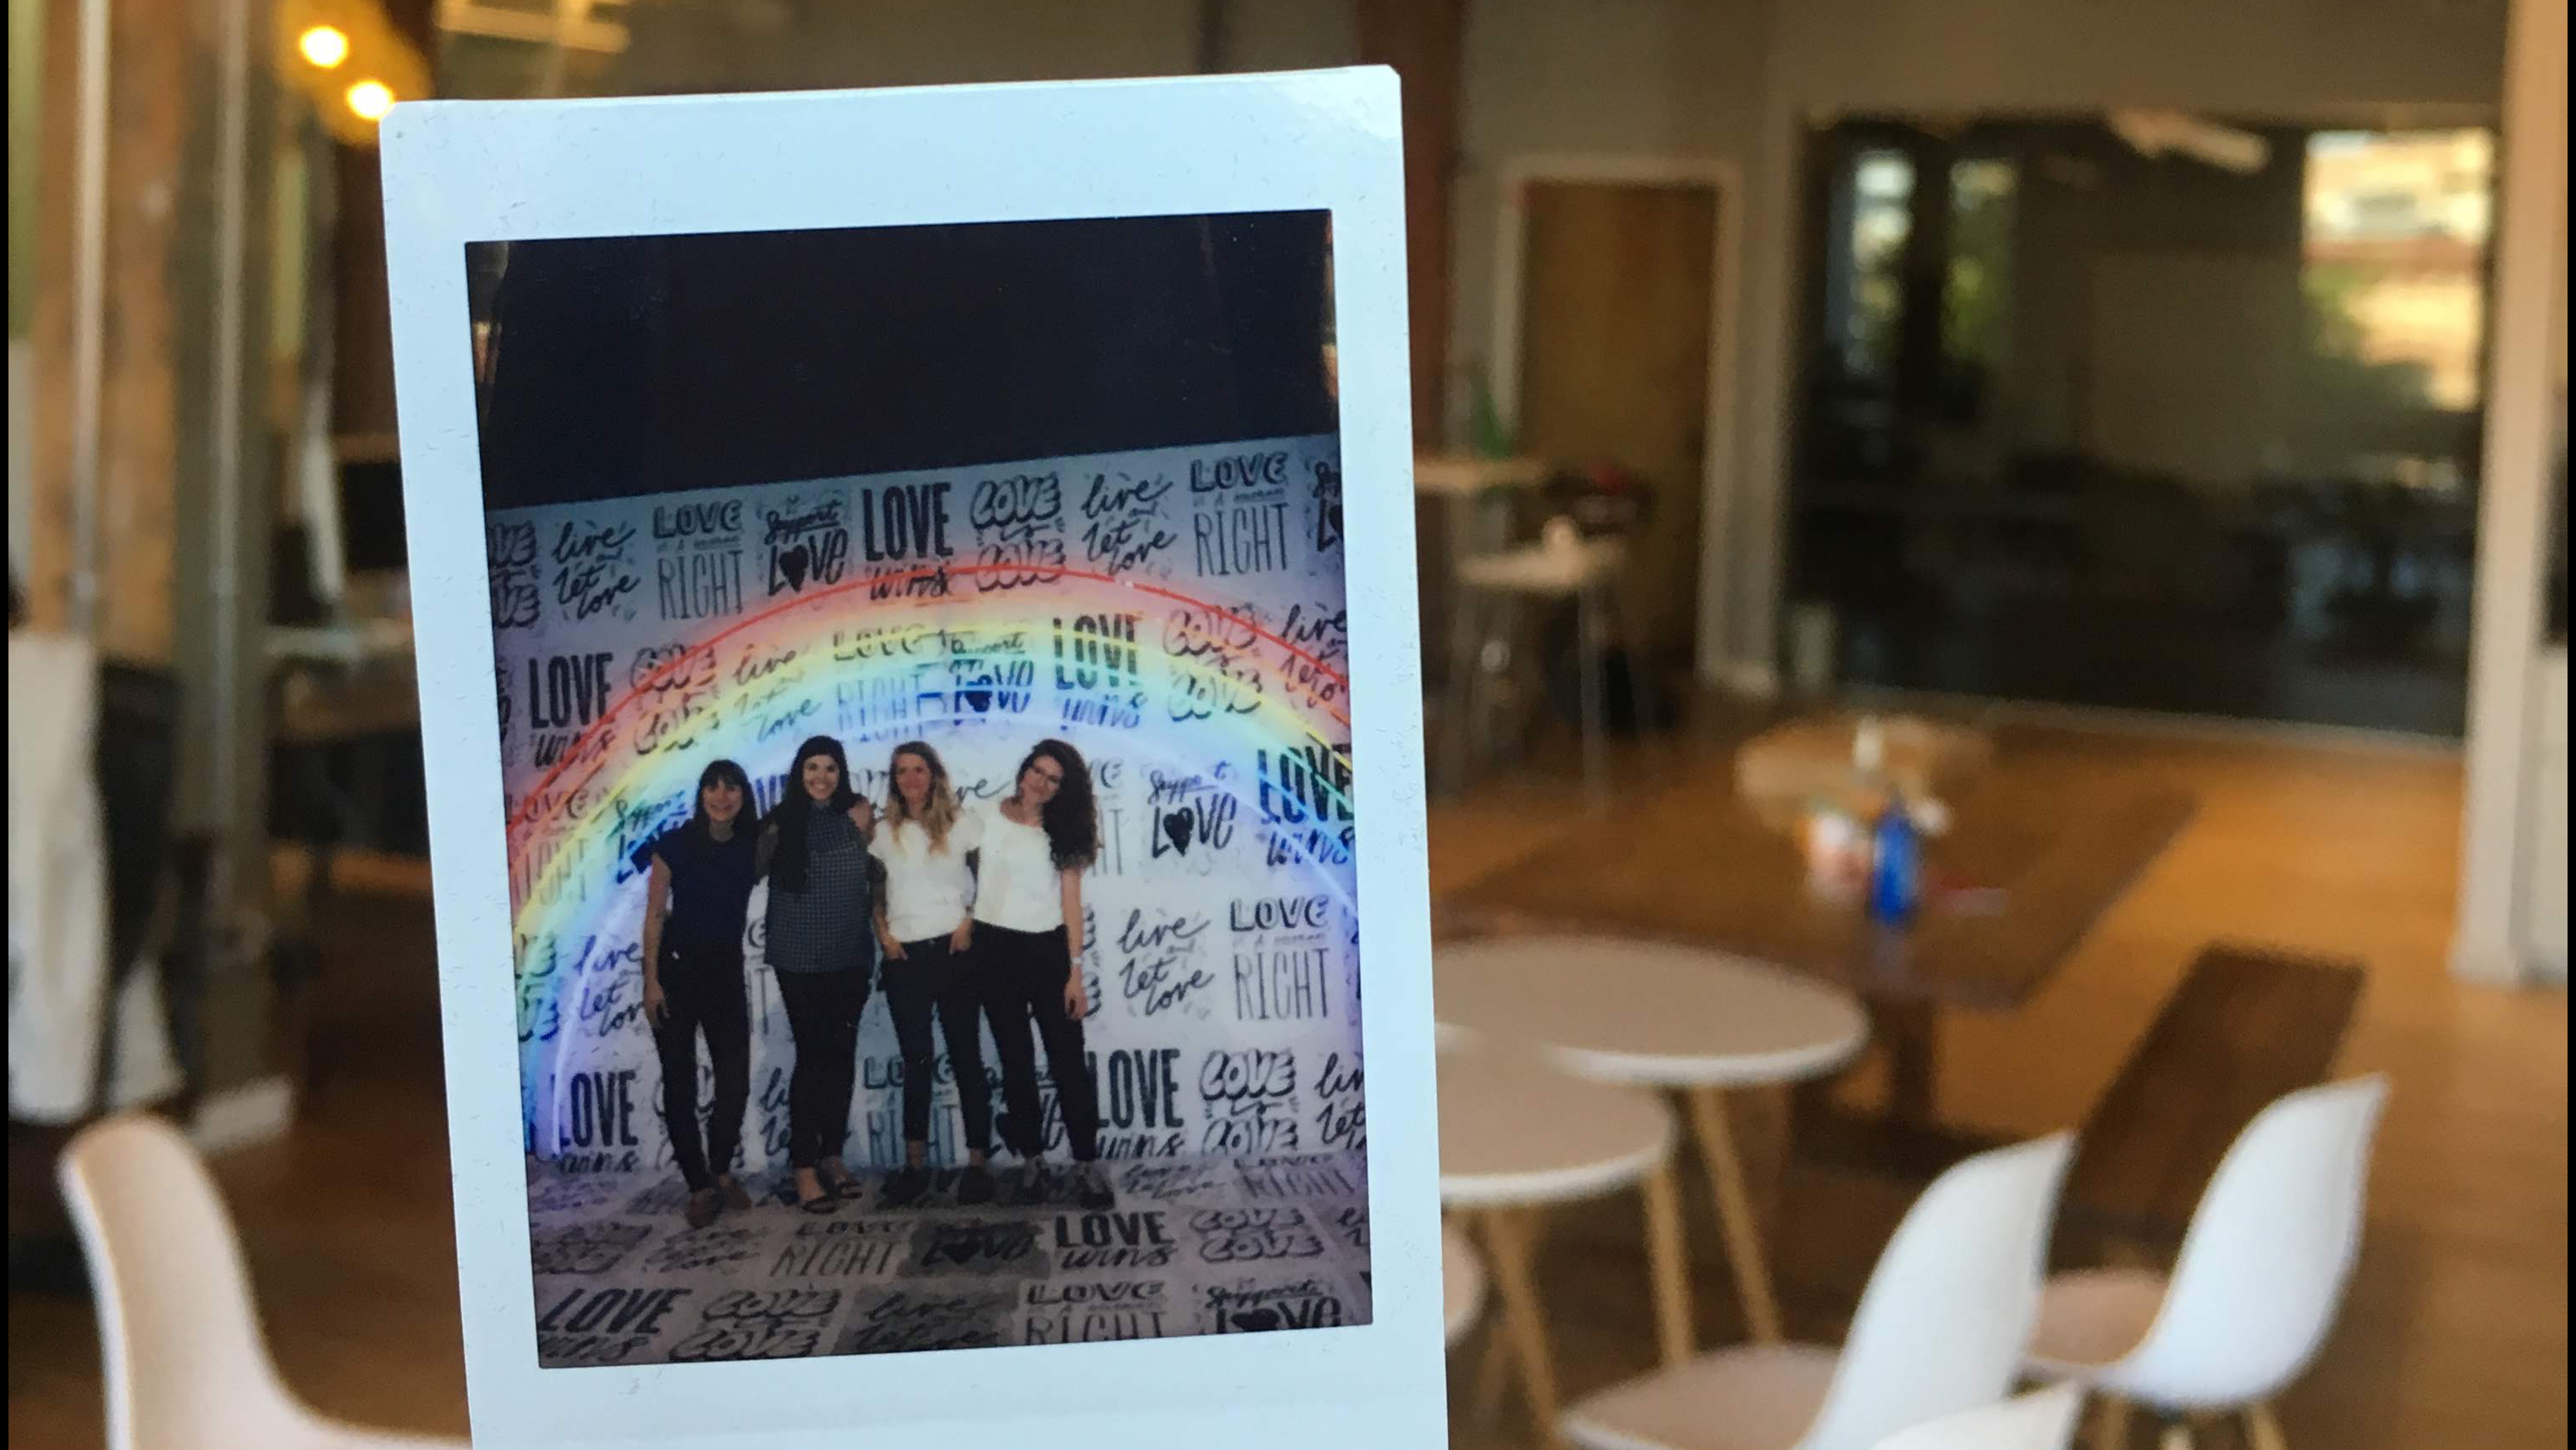 Polaroid of four women against a background that has several phrases about love written on it and a large neon rainbow overhead